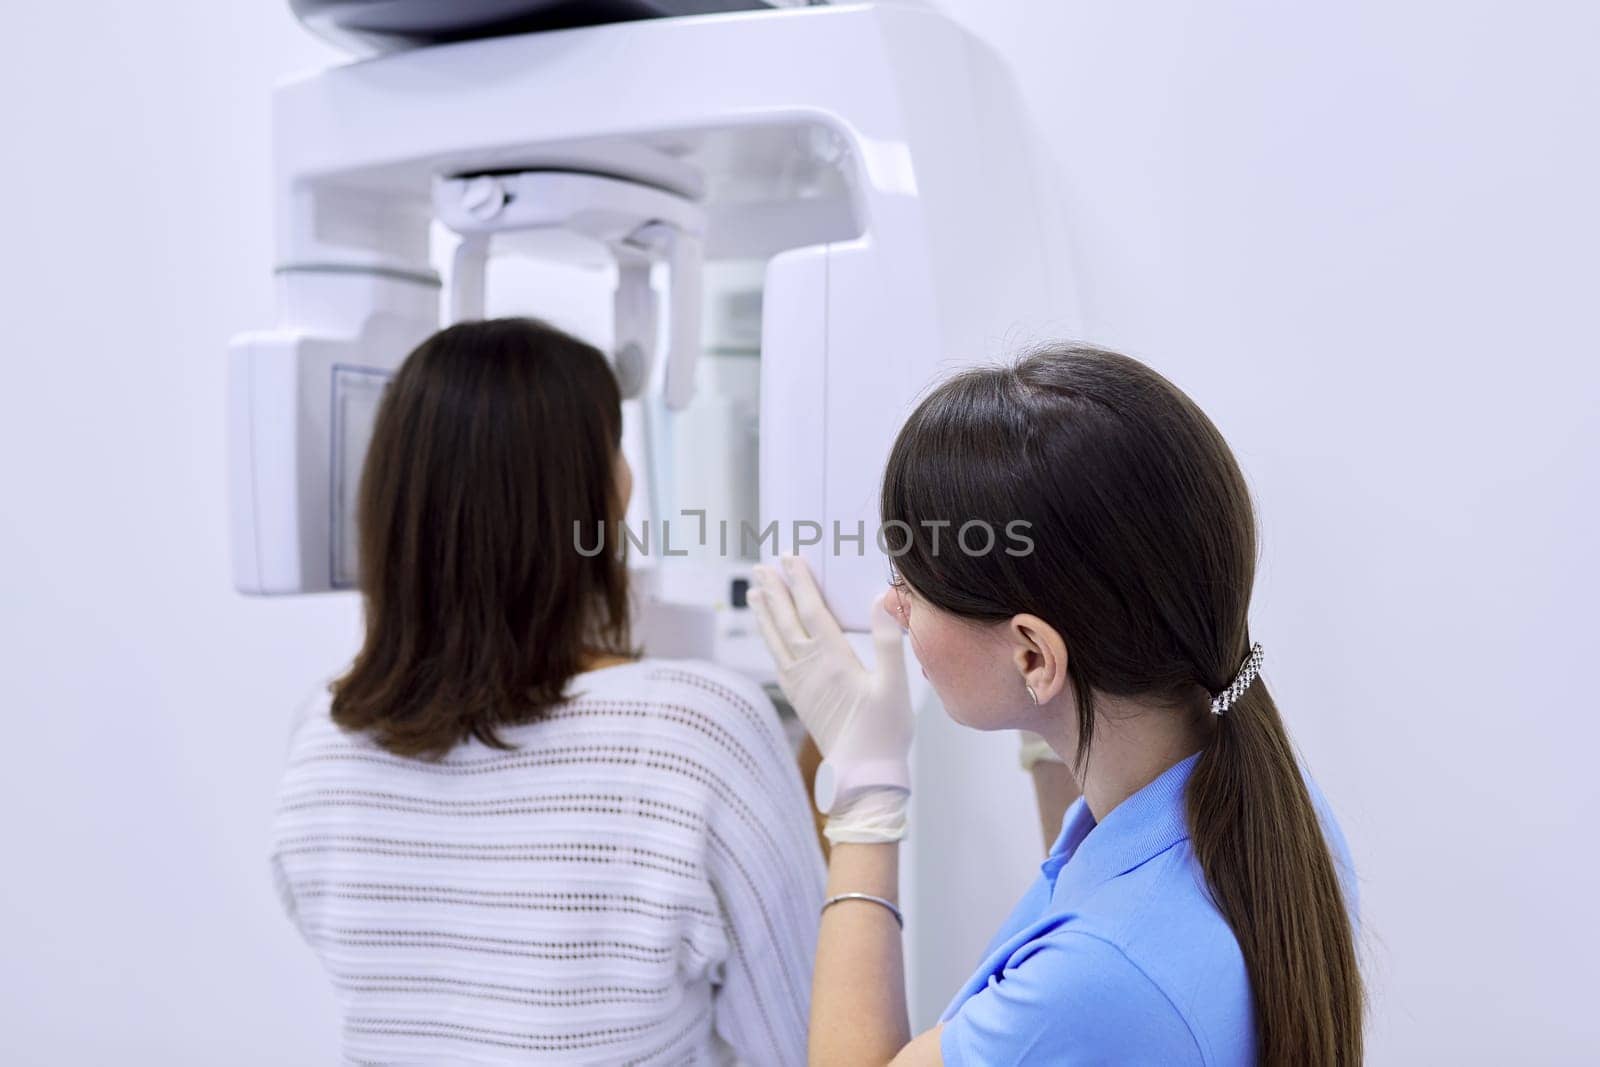 Dental diagnostic examination, dental x-ray equipment, nurse with woman patient. Panoramic radiography, medical technology